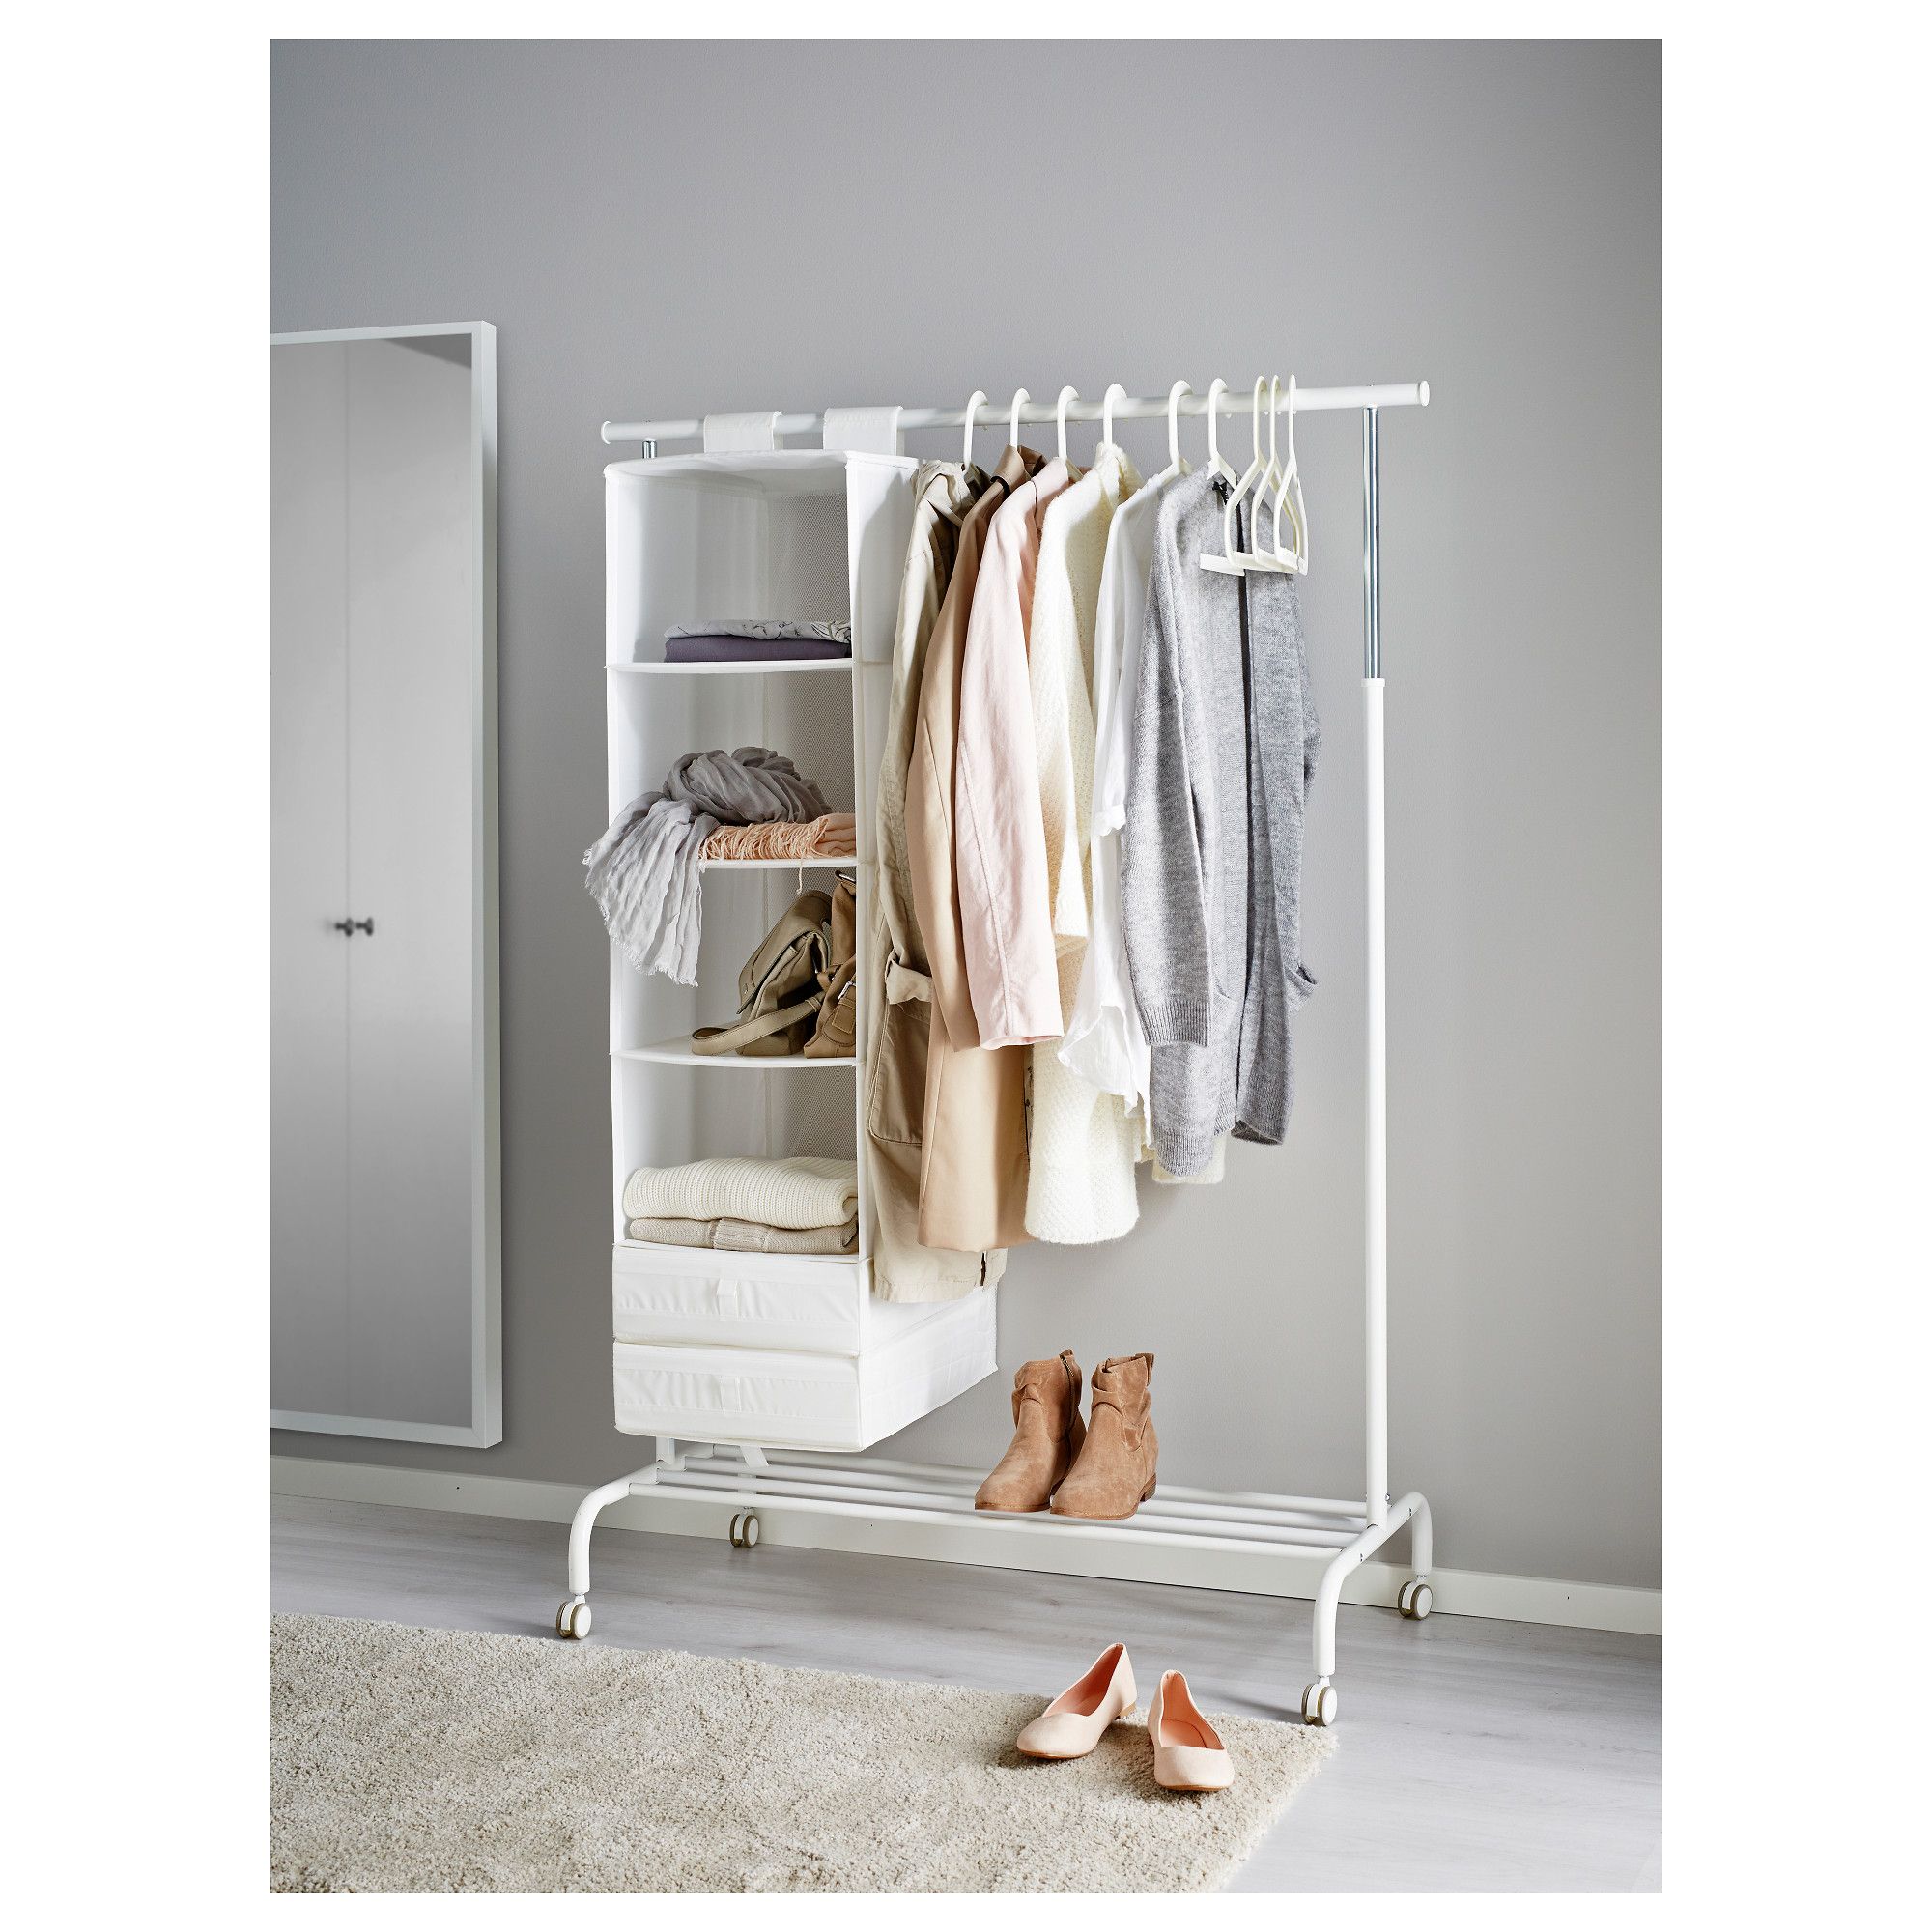 Rigga Clothes Rack White | Ikea Lietuva Intended For Ikea Double Rail Wardrobes (Gallery 6 of 20)